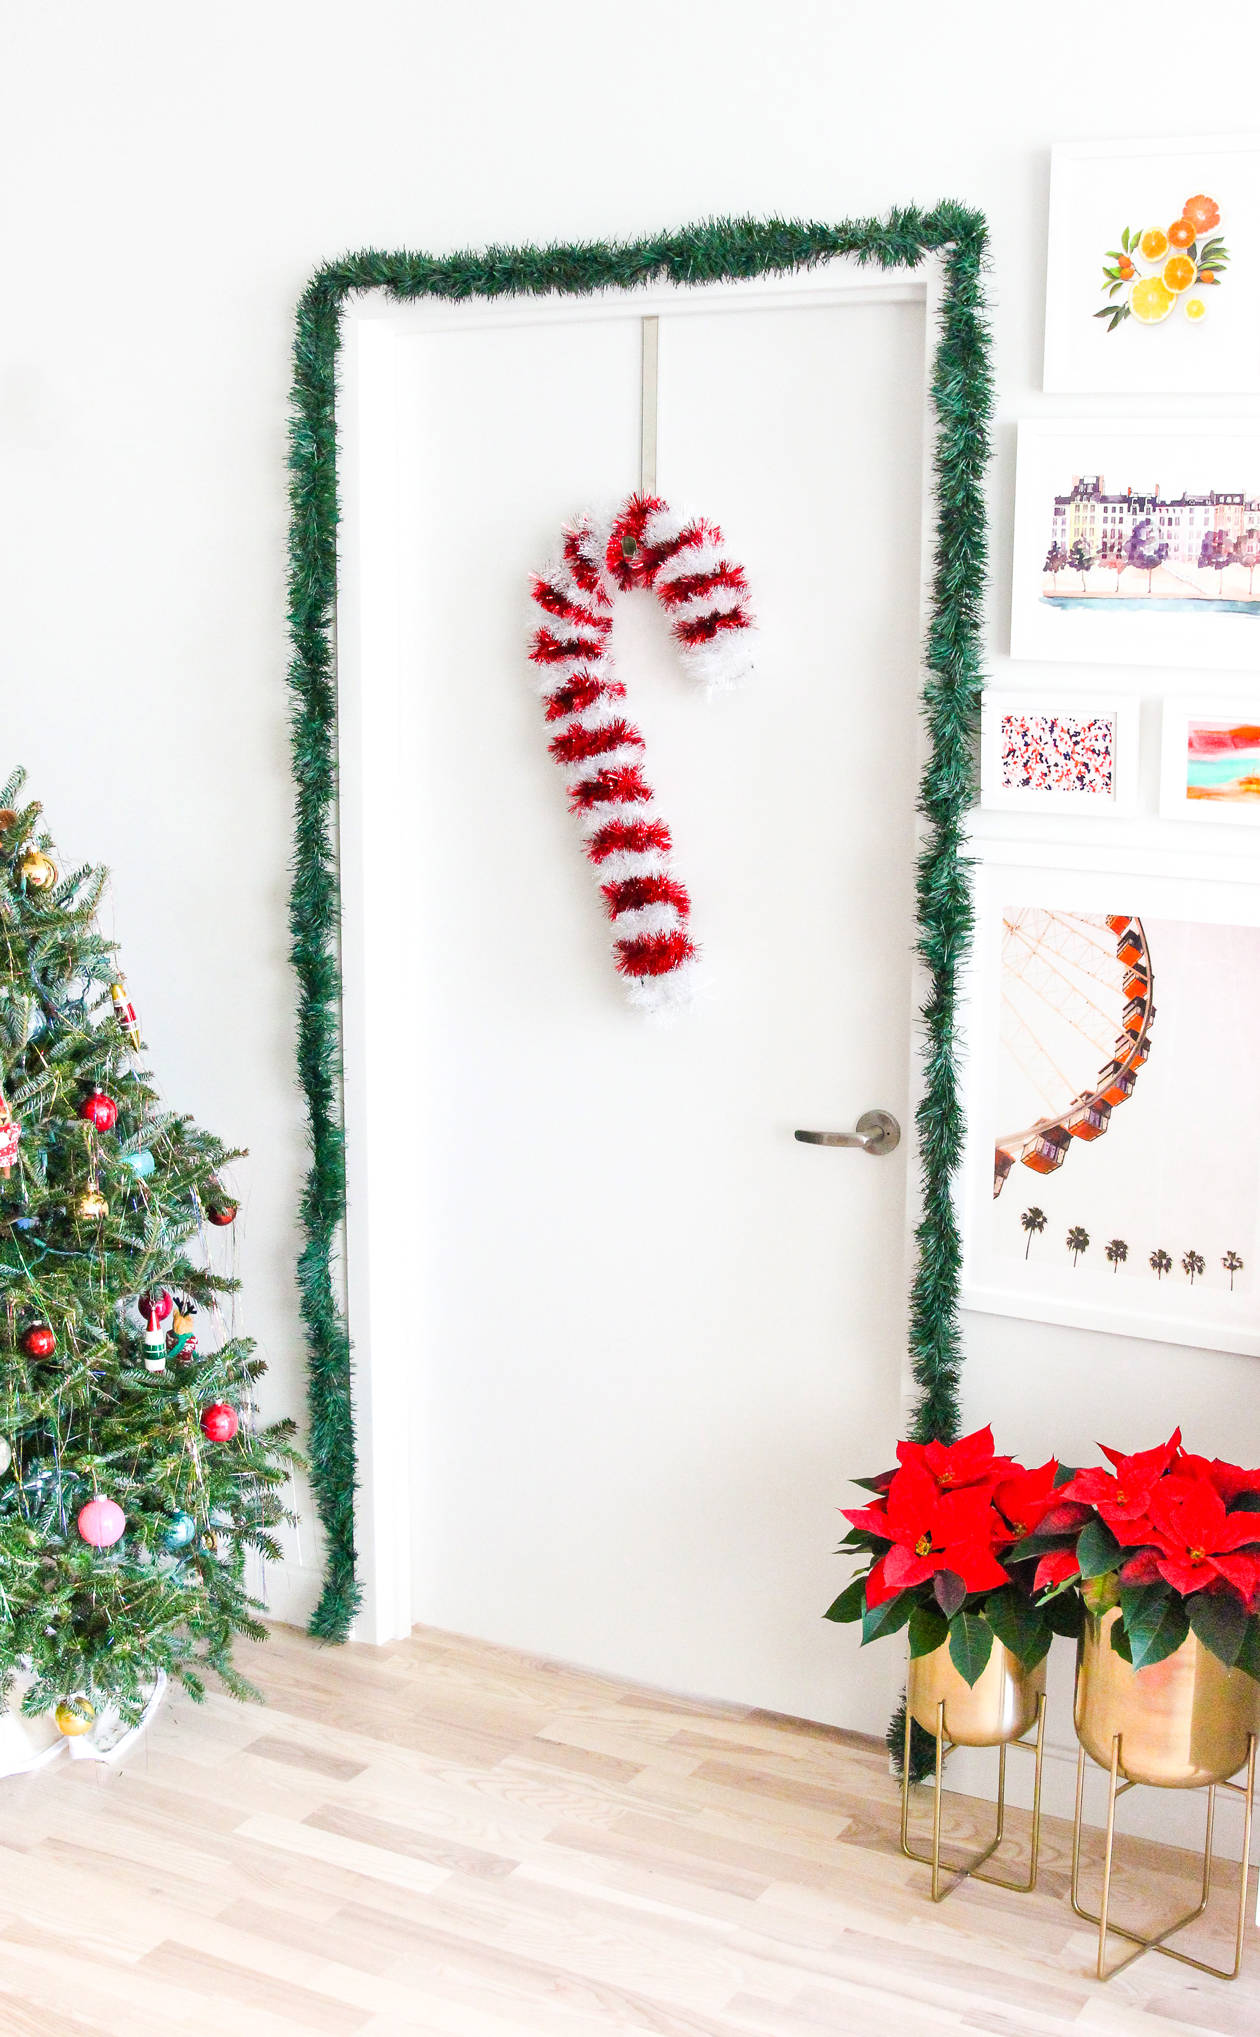 Make this DIY Candy Cane Wreath in just a few minutes! All you need is a wreath form an some tinsel